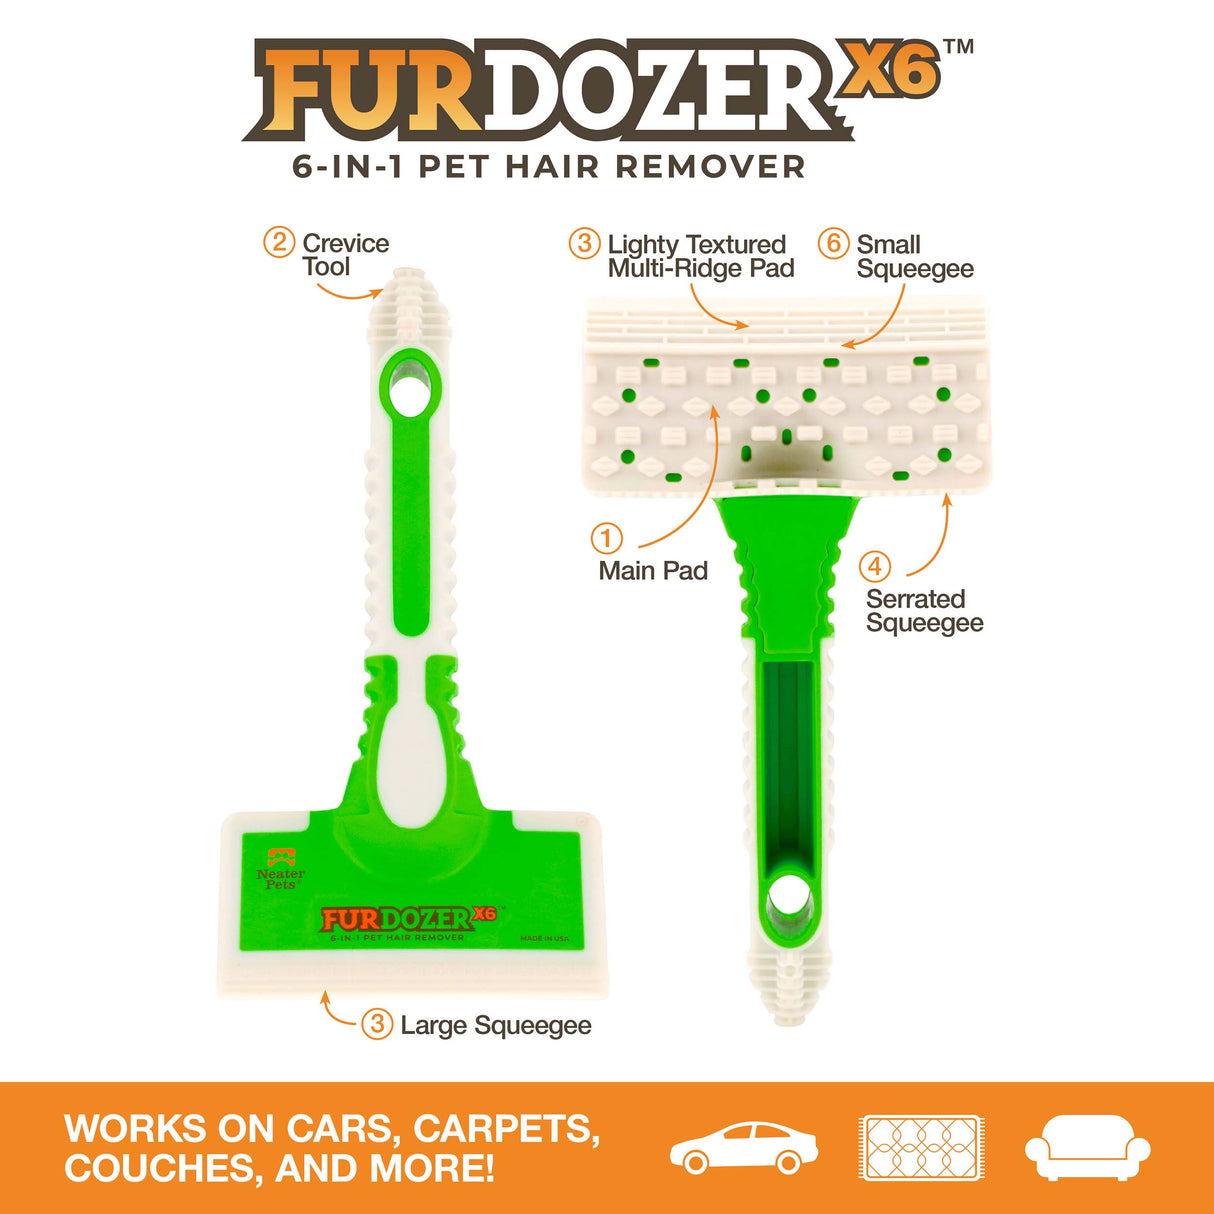 Diagram of the six features of the FurDozer X6